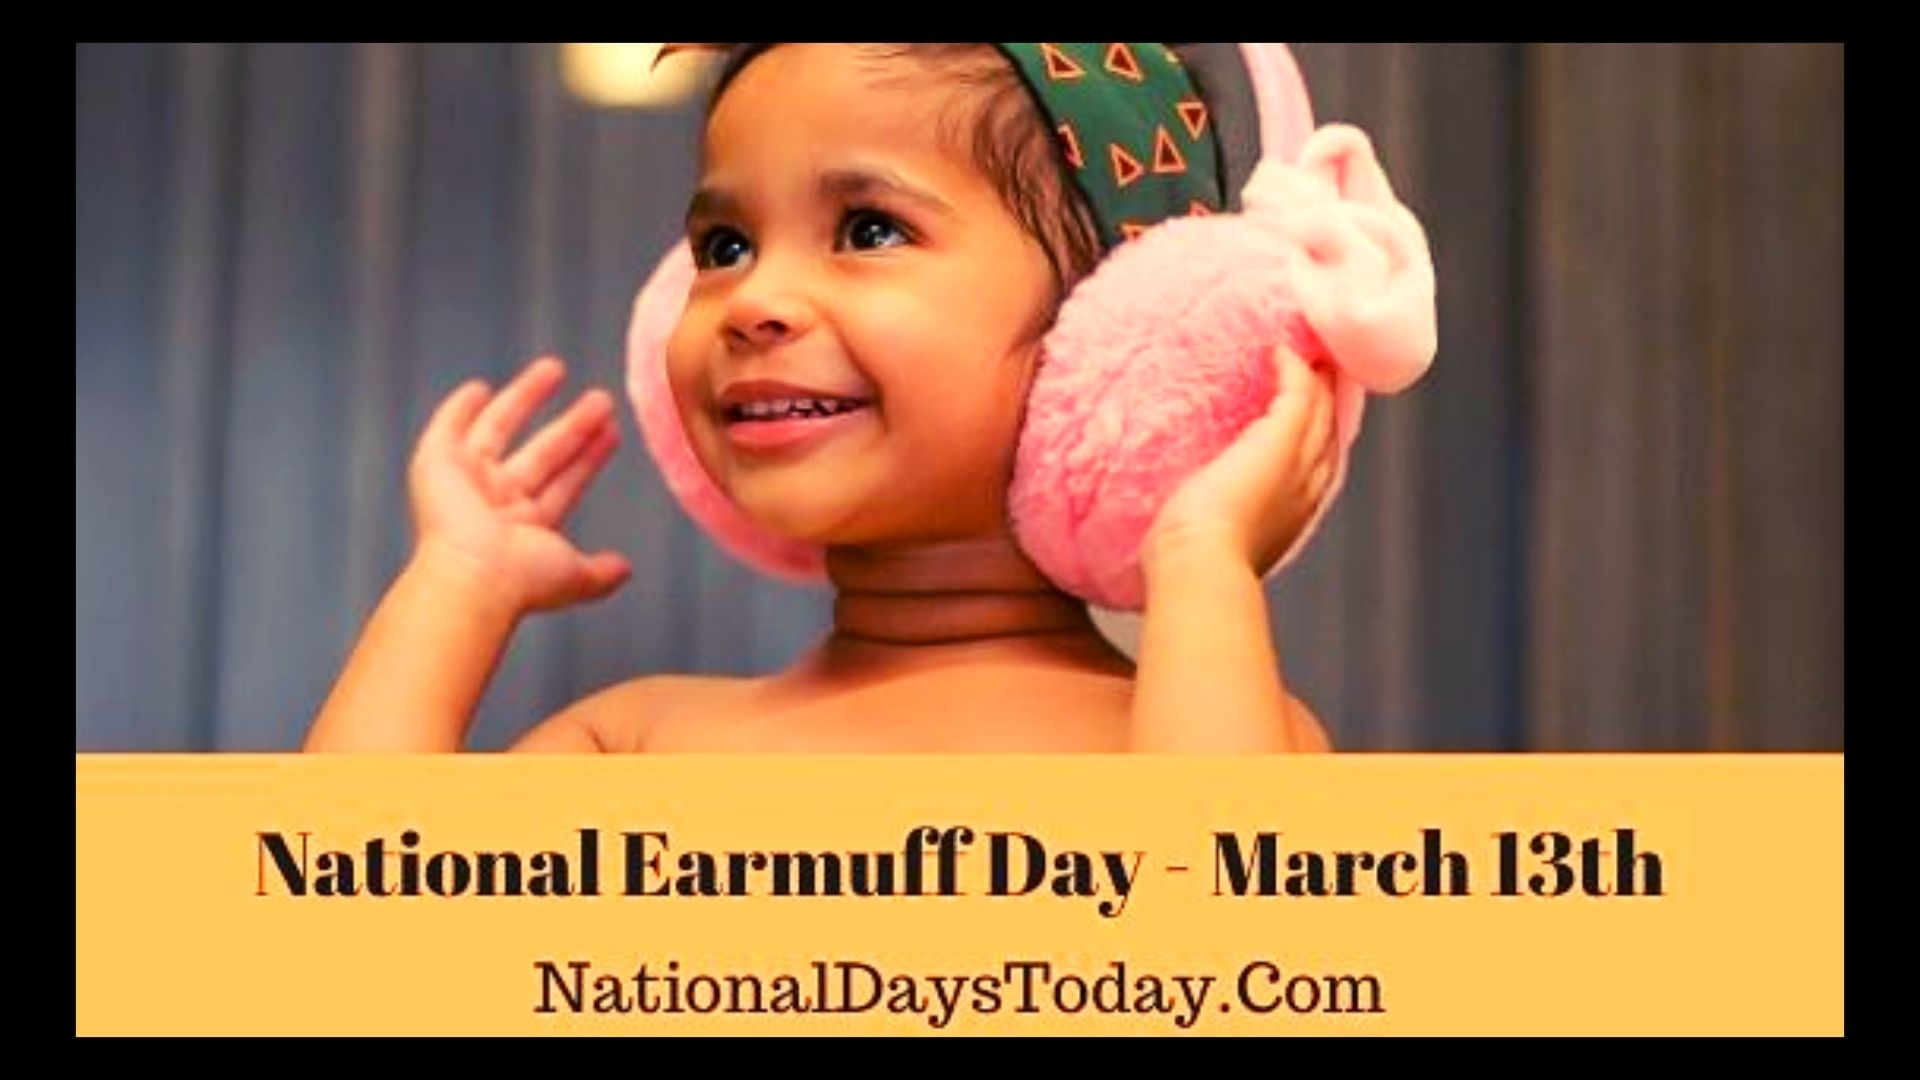 Happy Earmuff Day 2022 Images